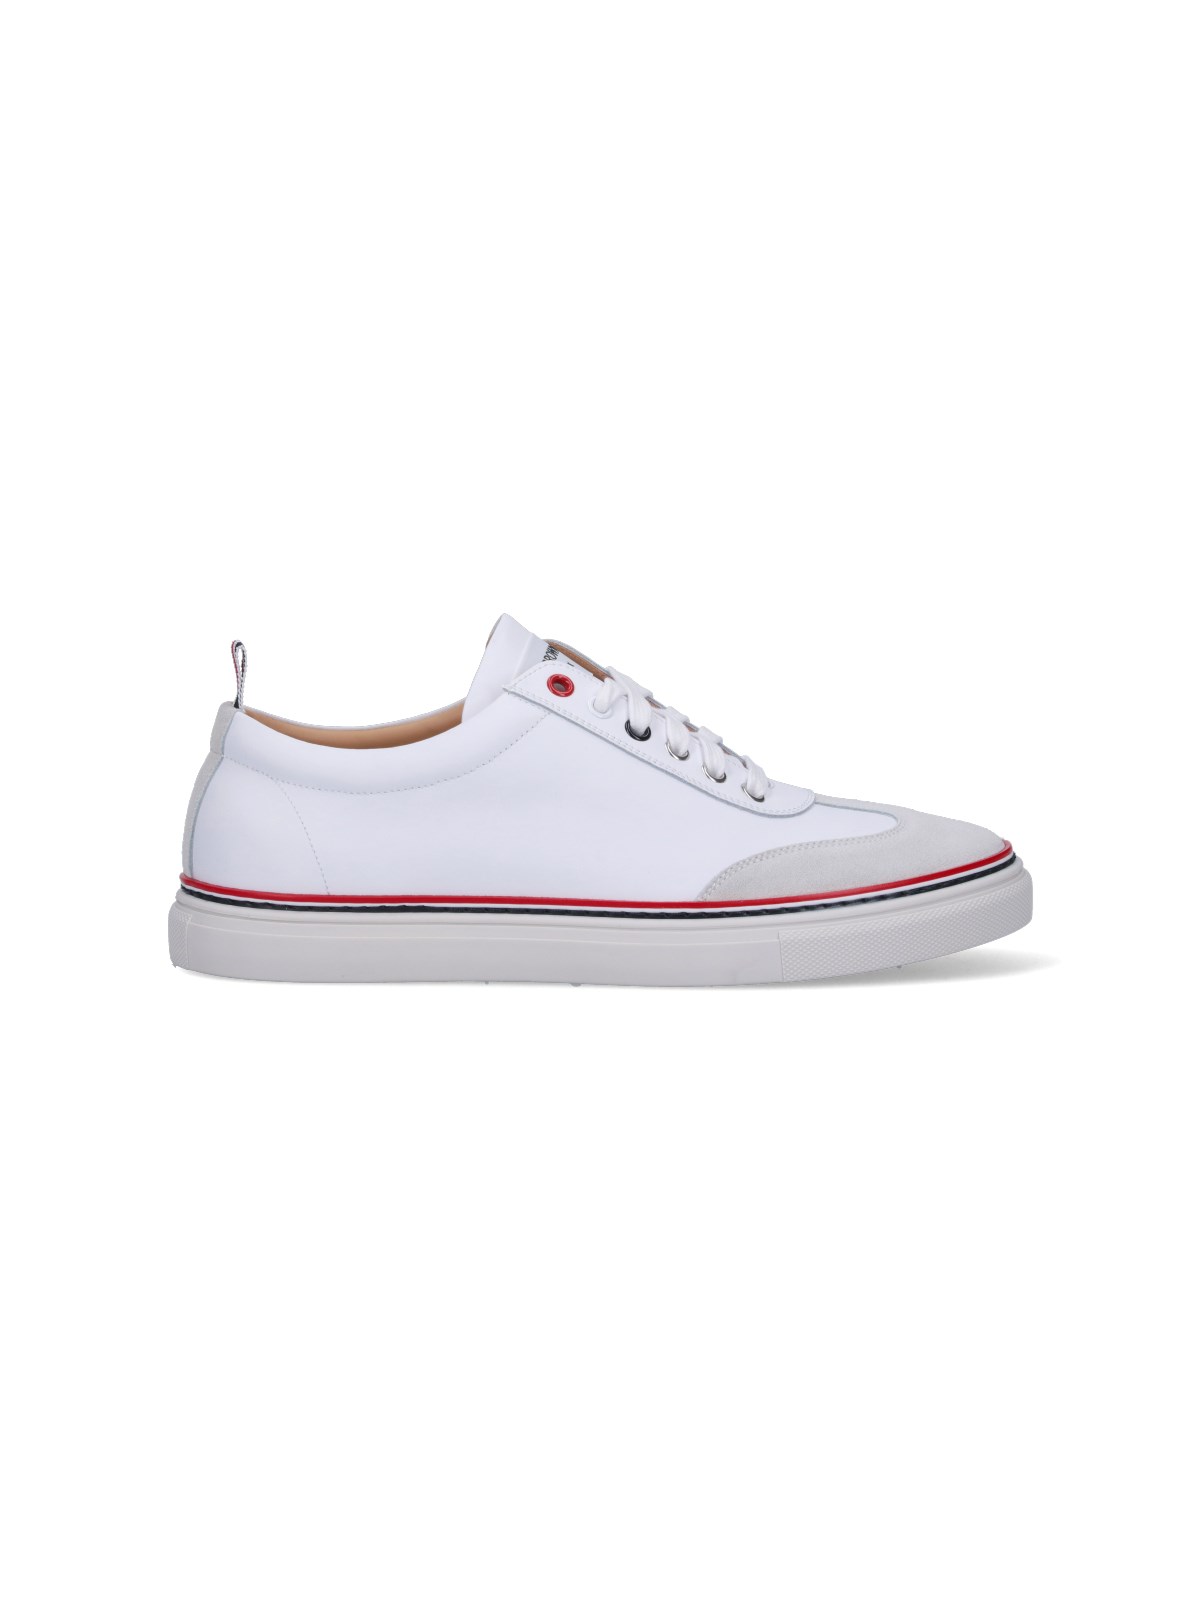 Thom Browne Tricolor Detail Sneakers In White